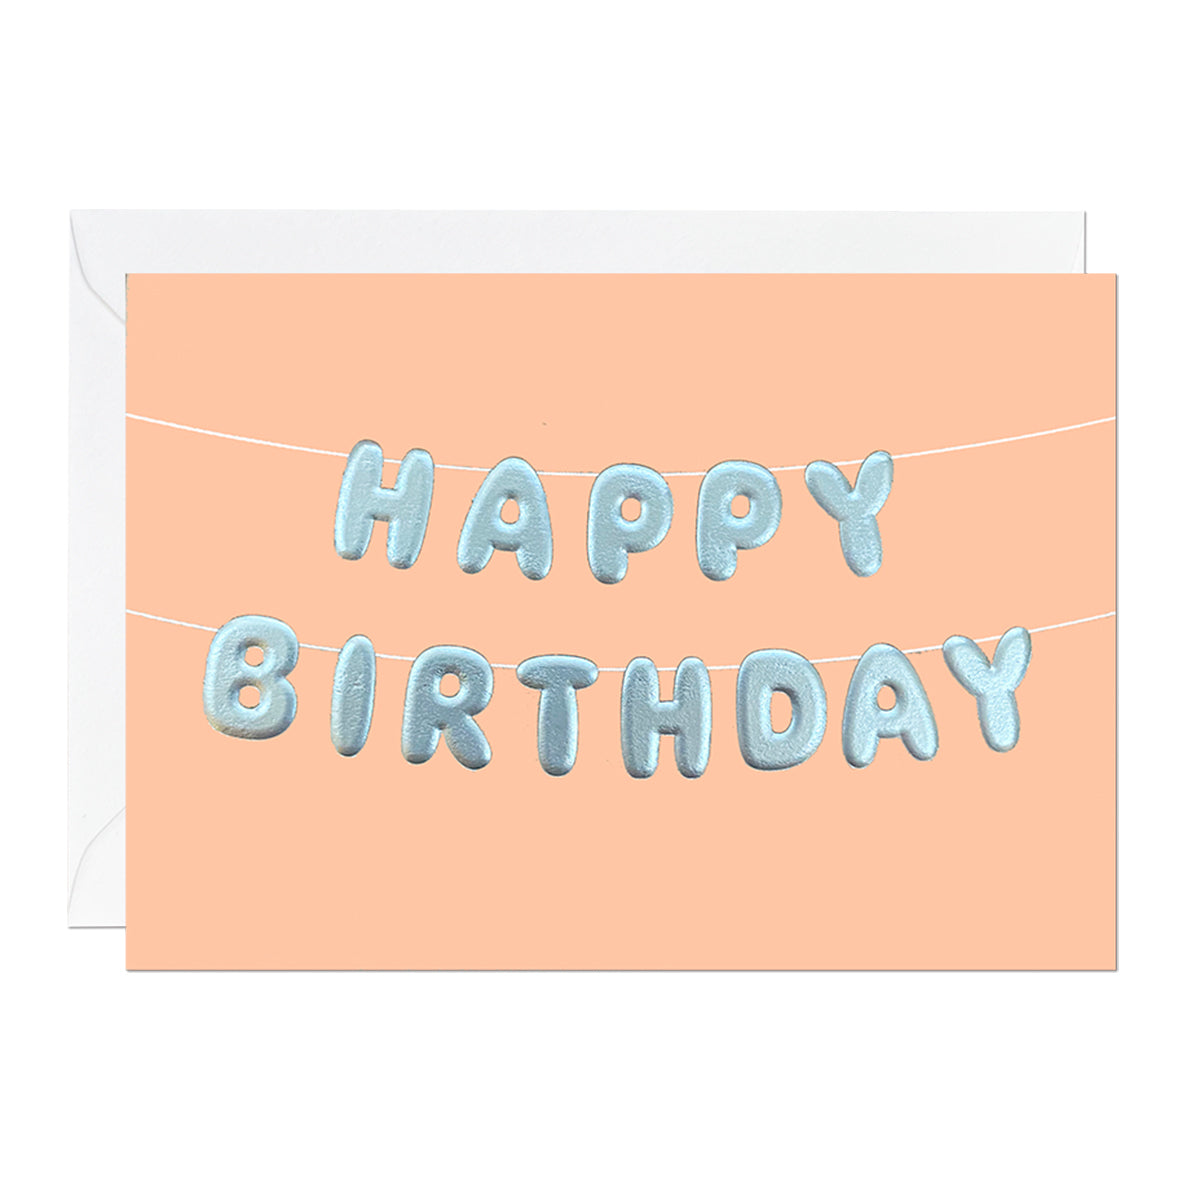 An orange birthday card with birthday bunting that reads 'happy birthday' printed with an embossed silver foil